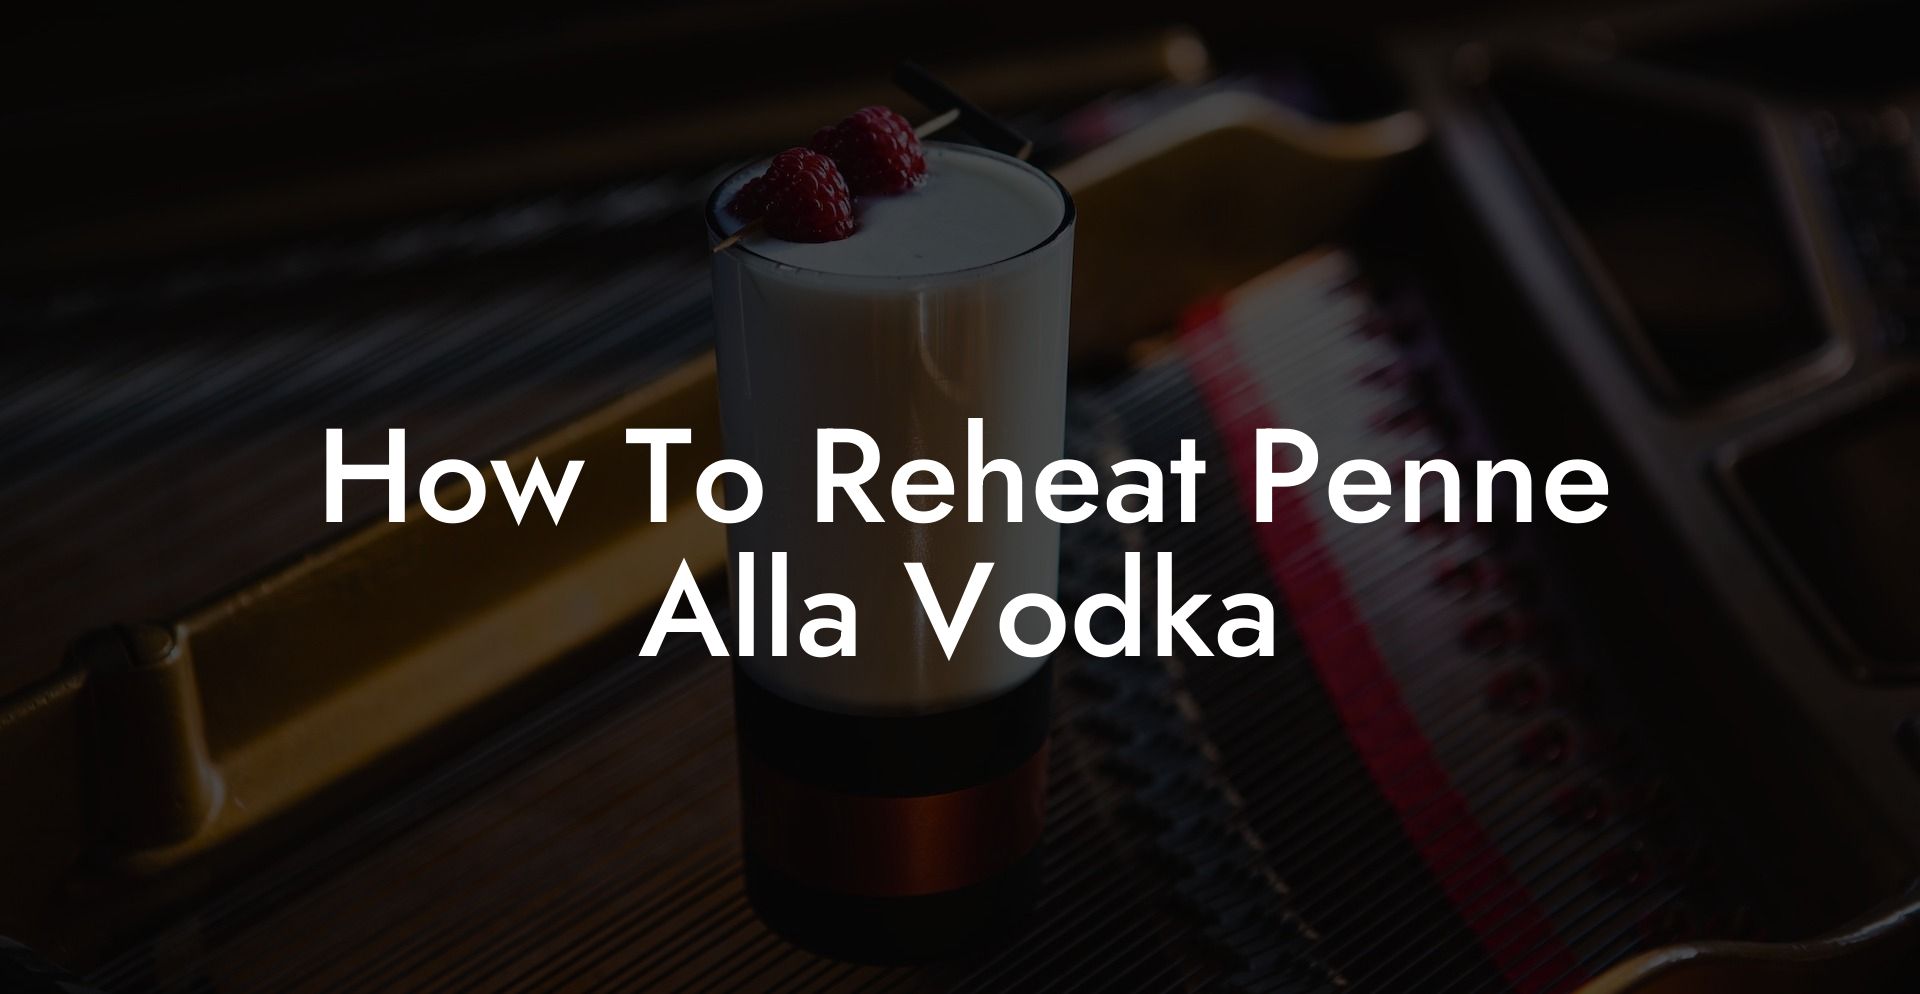 How To Reheat Penne Alla Vodka